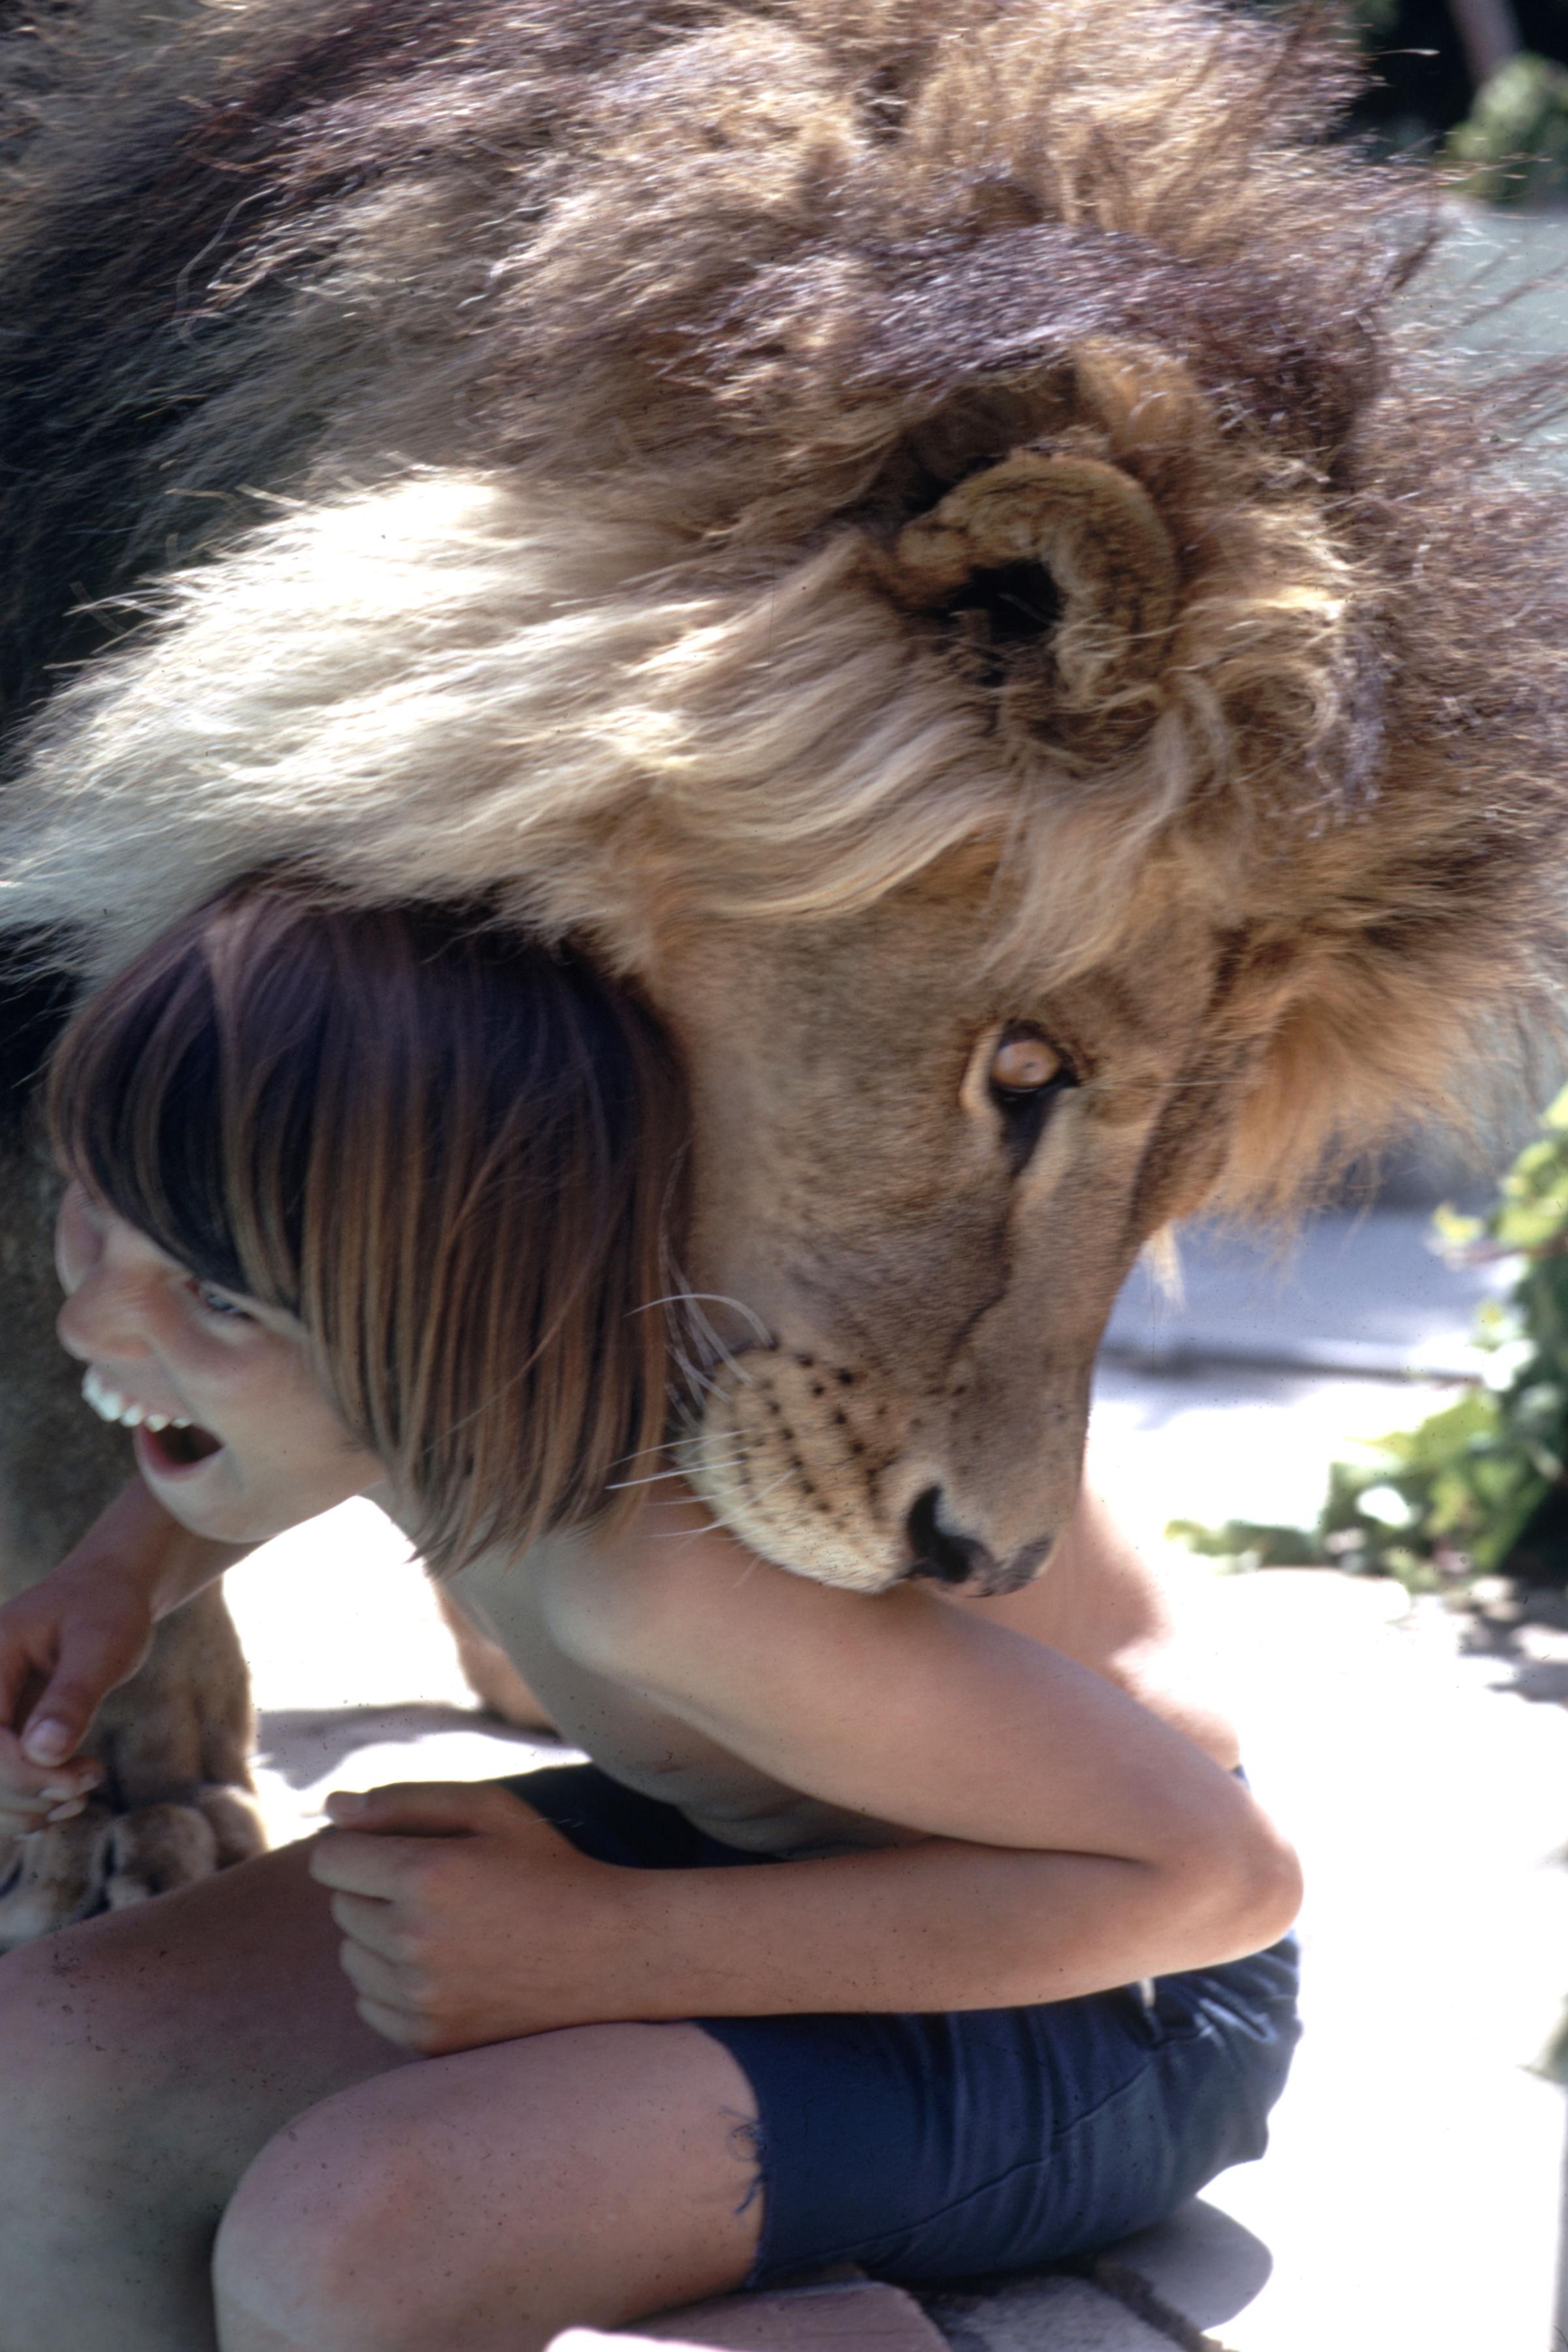 Neil the lion plays with a child, Calif., 1971.